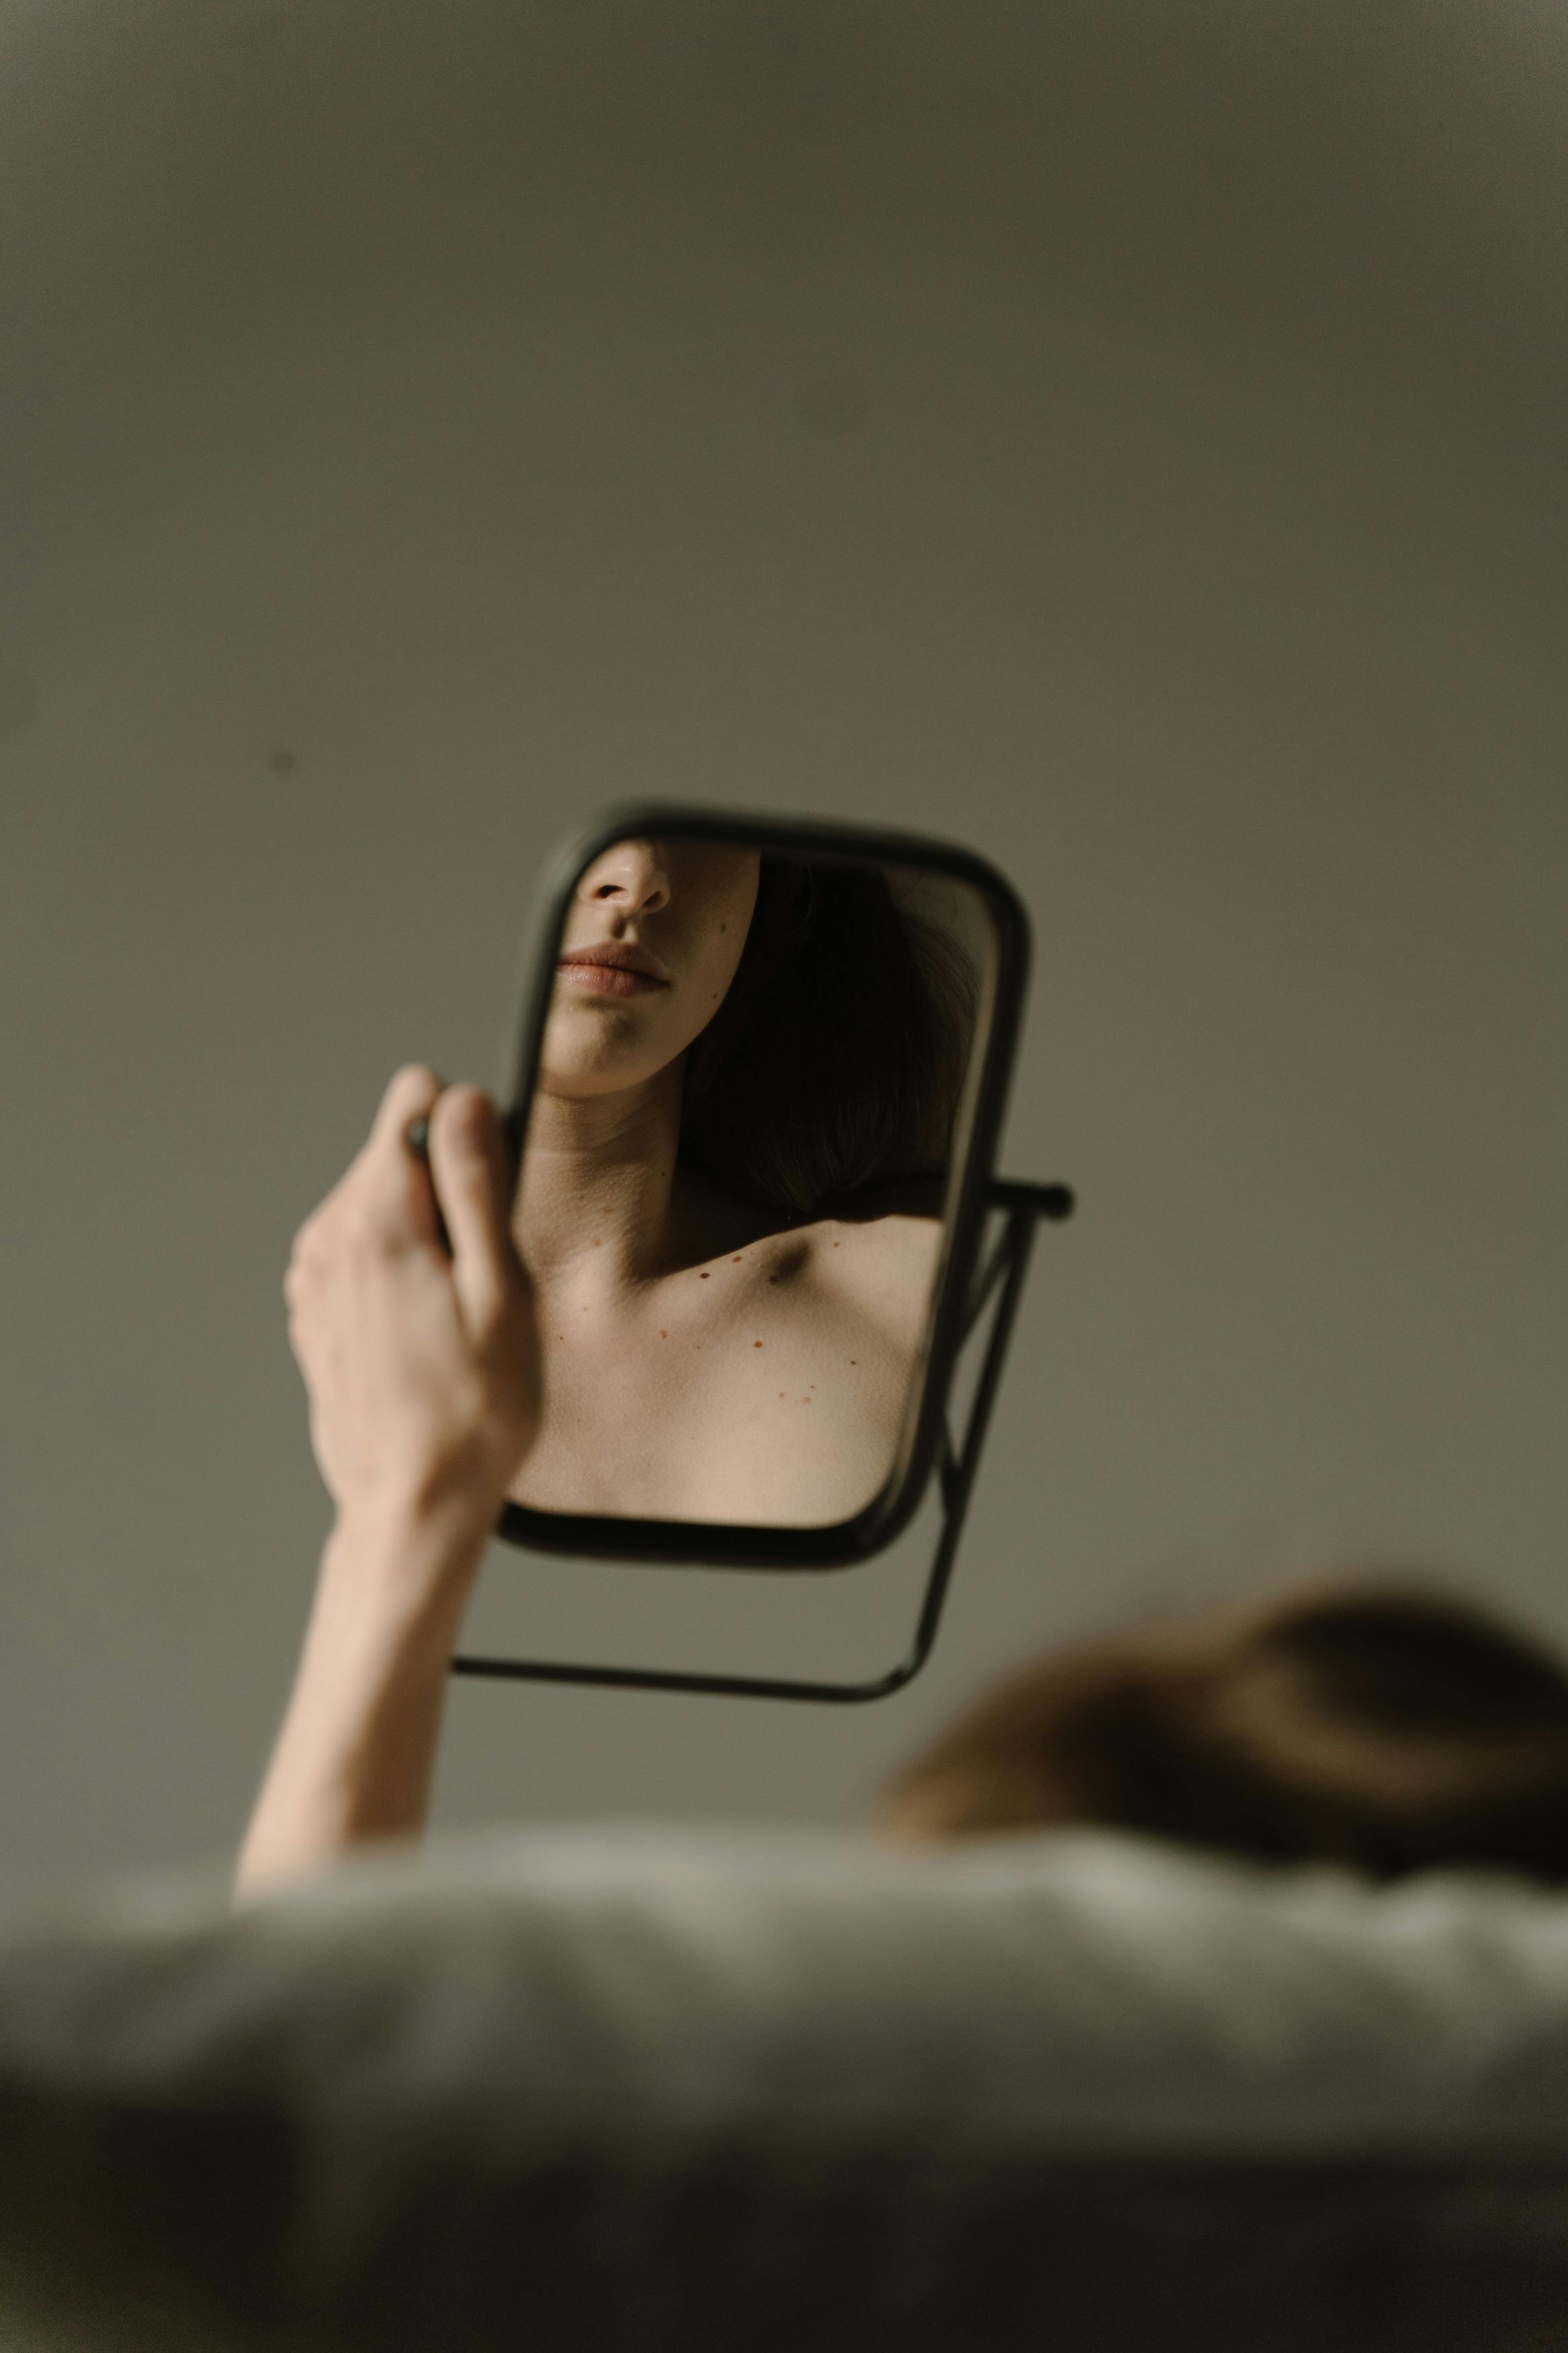 Woman sitting on a sofa looking at her reflection on a mirror | Source: Pexels